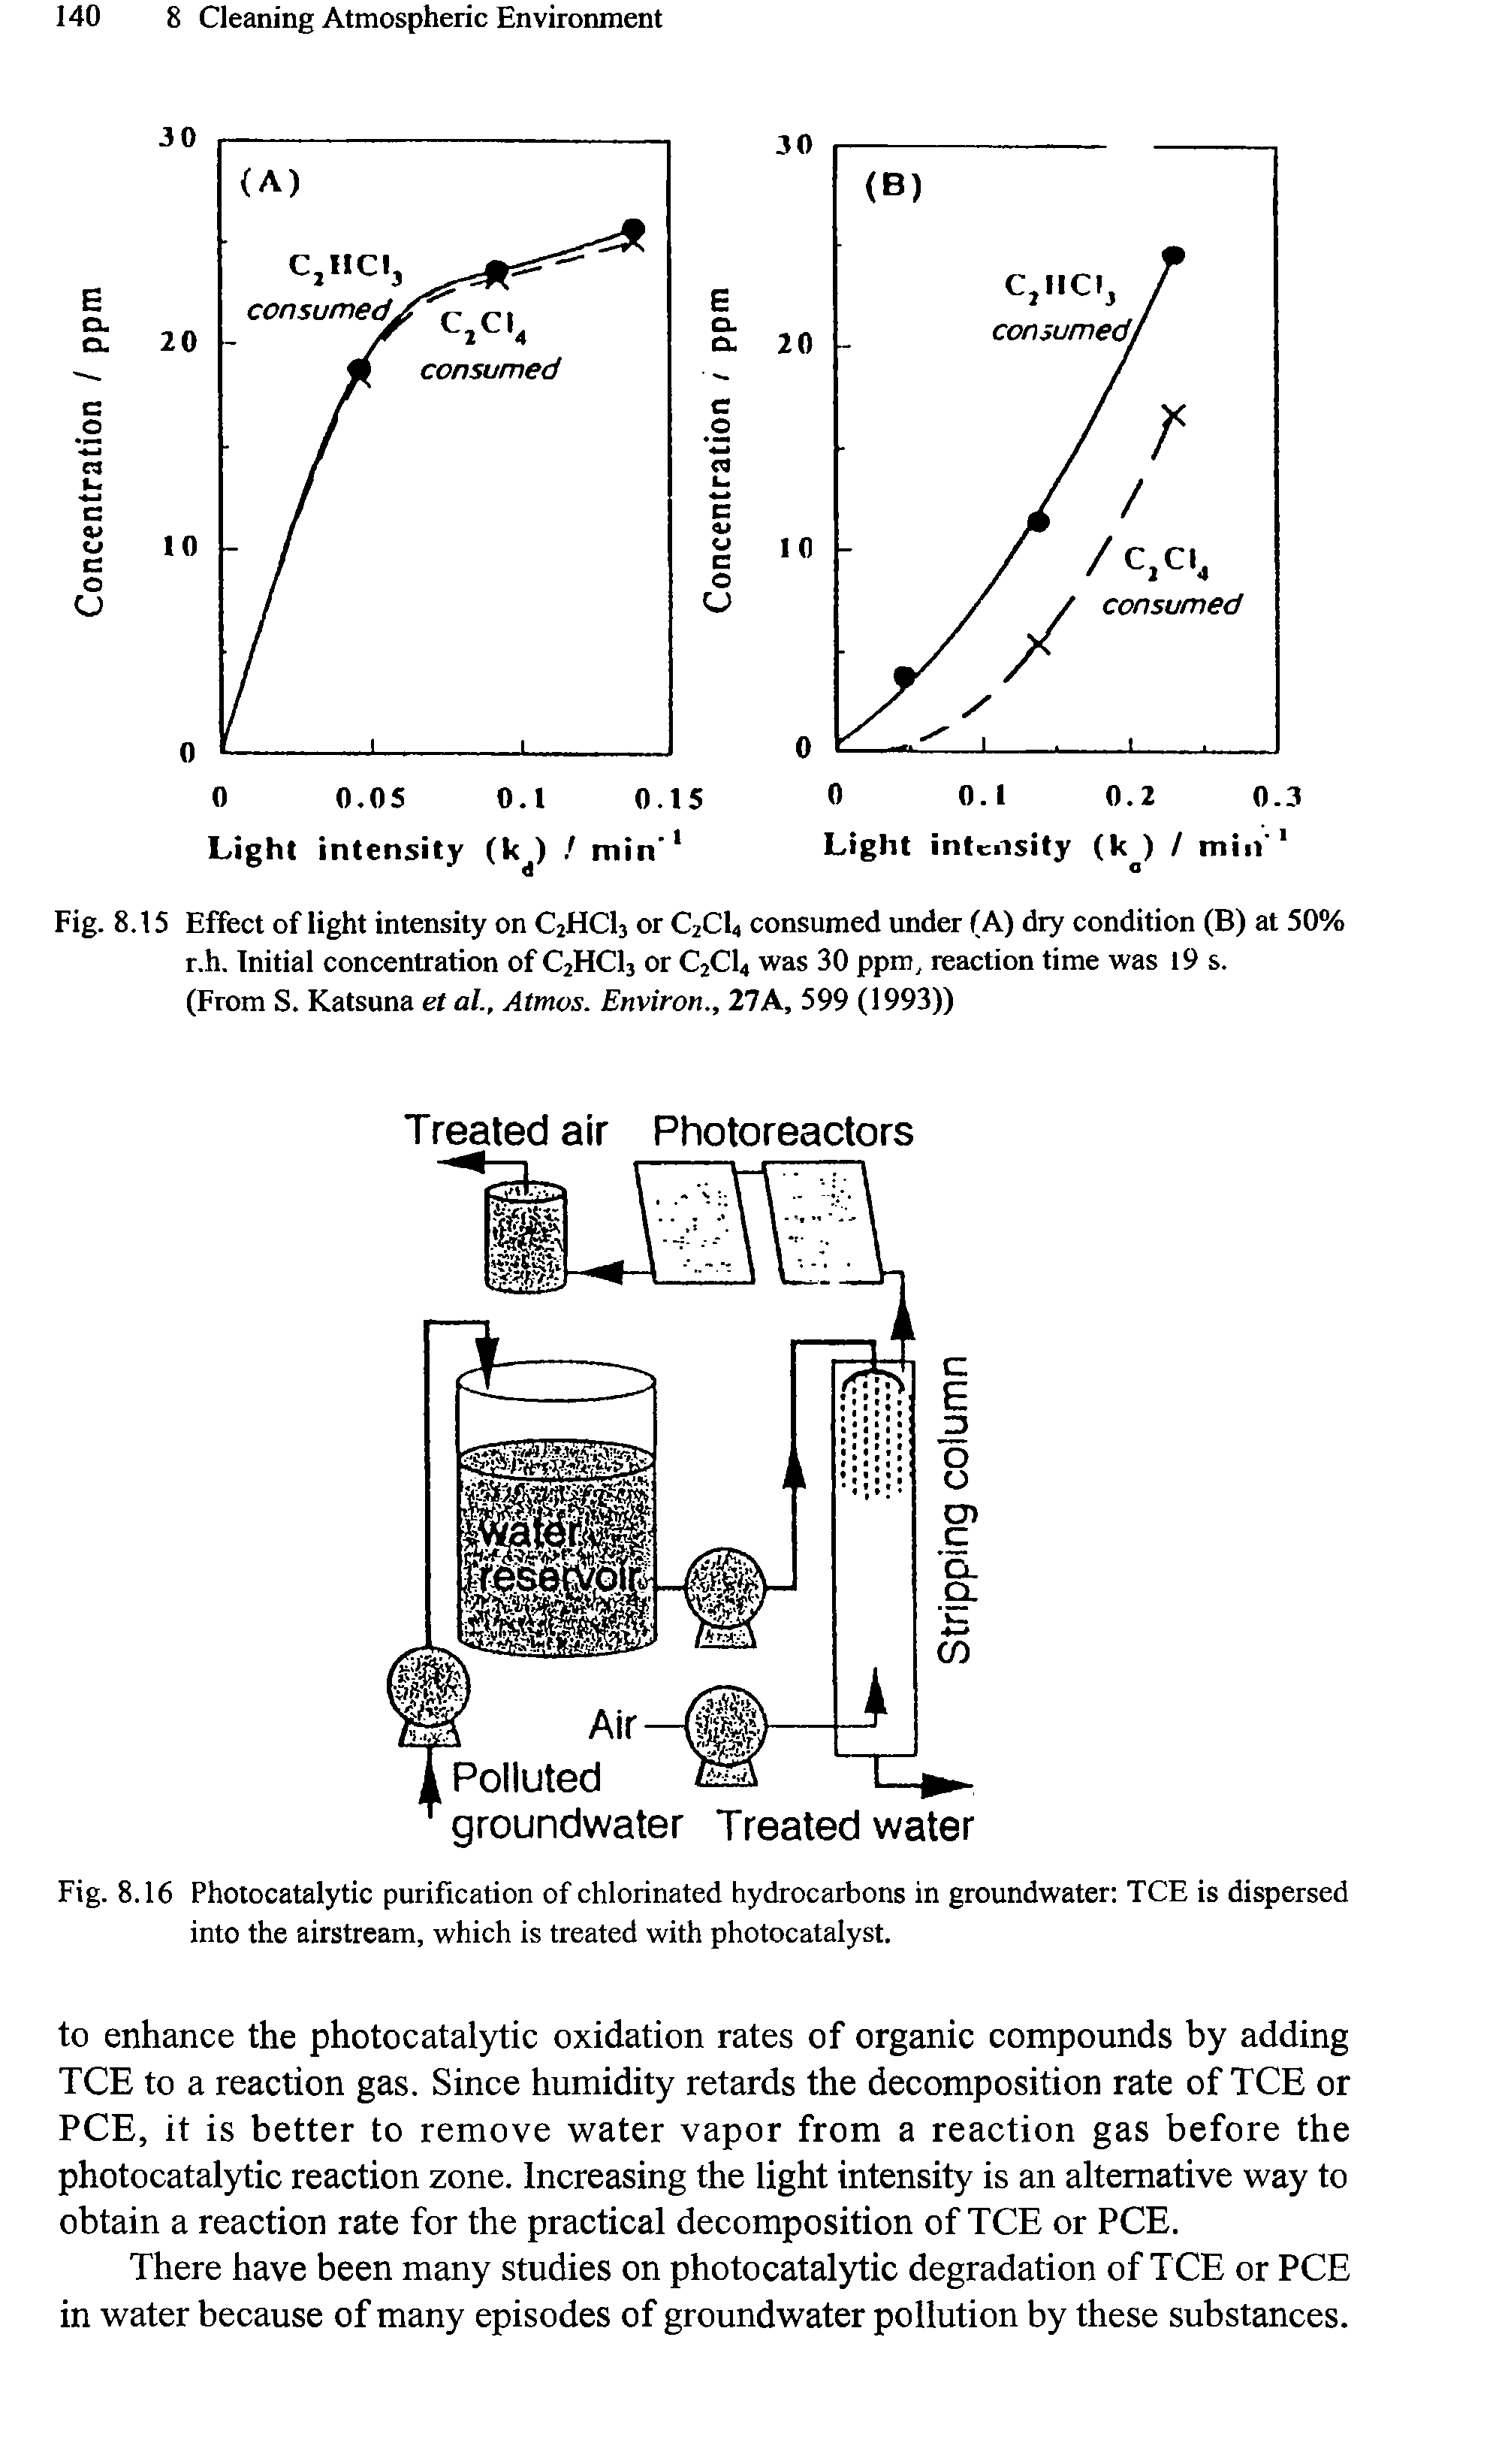 Fig. 8.16 Photocatalytic purification of chlorinated hydrocarbons in groundwater TCE is dispersed into the airstream, which is treated with photocatalyst.